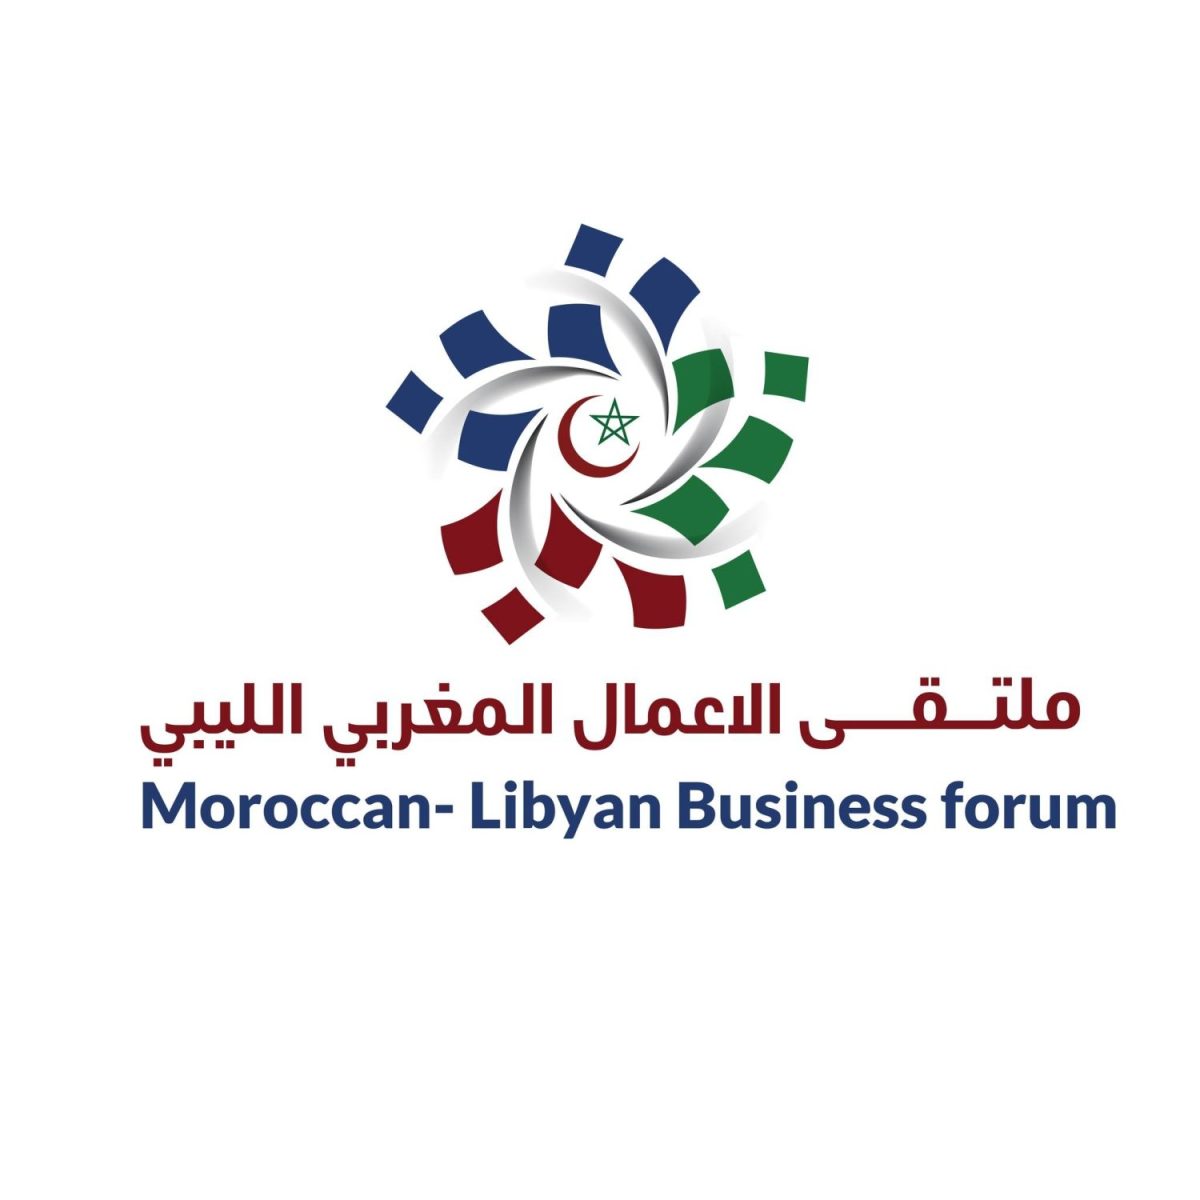 The 2nd Moroccan-Libyan Business Forum and Exhibition: 12-14 September, Tangier – Morocco